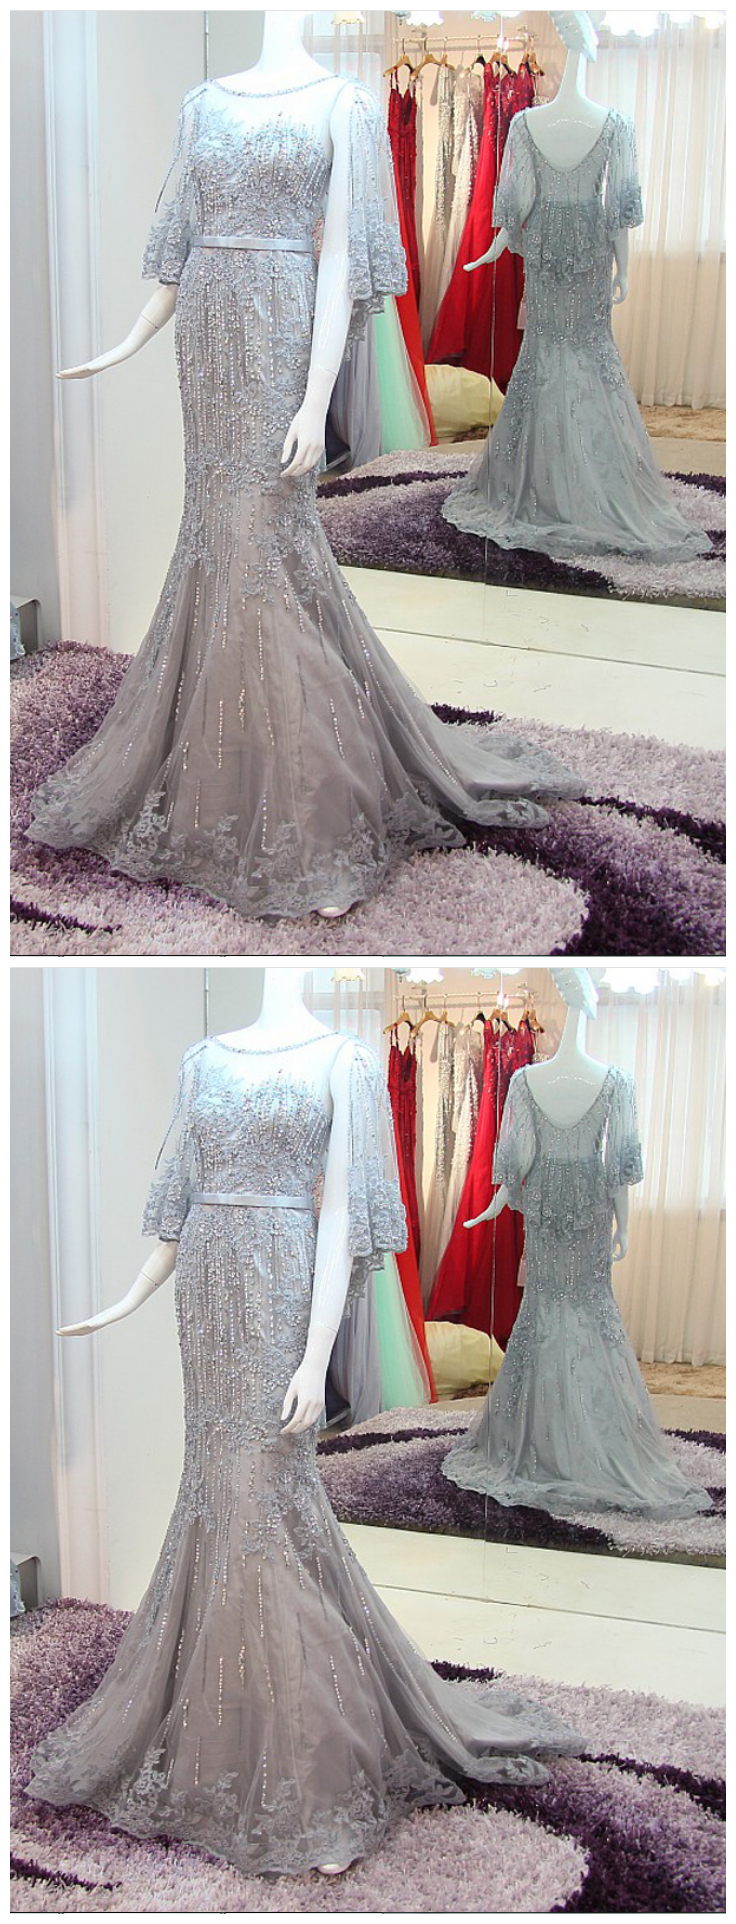 Mermaid Silver Lace Prom Dress With Sequins, Modest Mermaid Prom Dresses, Unique Evening Gowns P2911